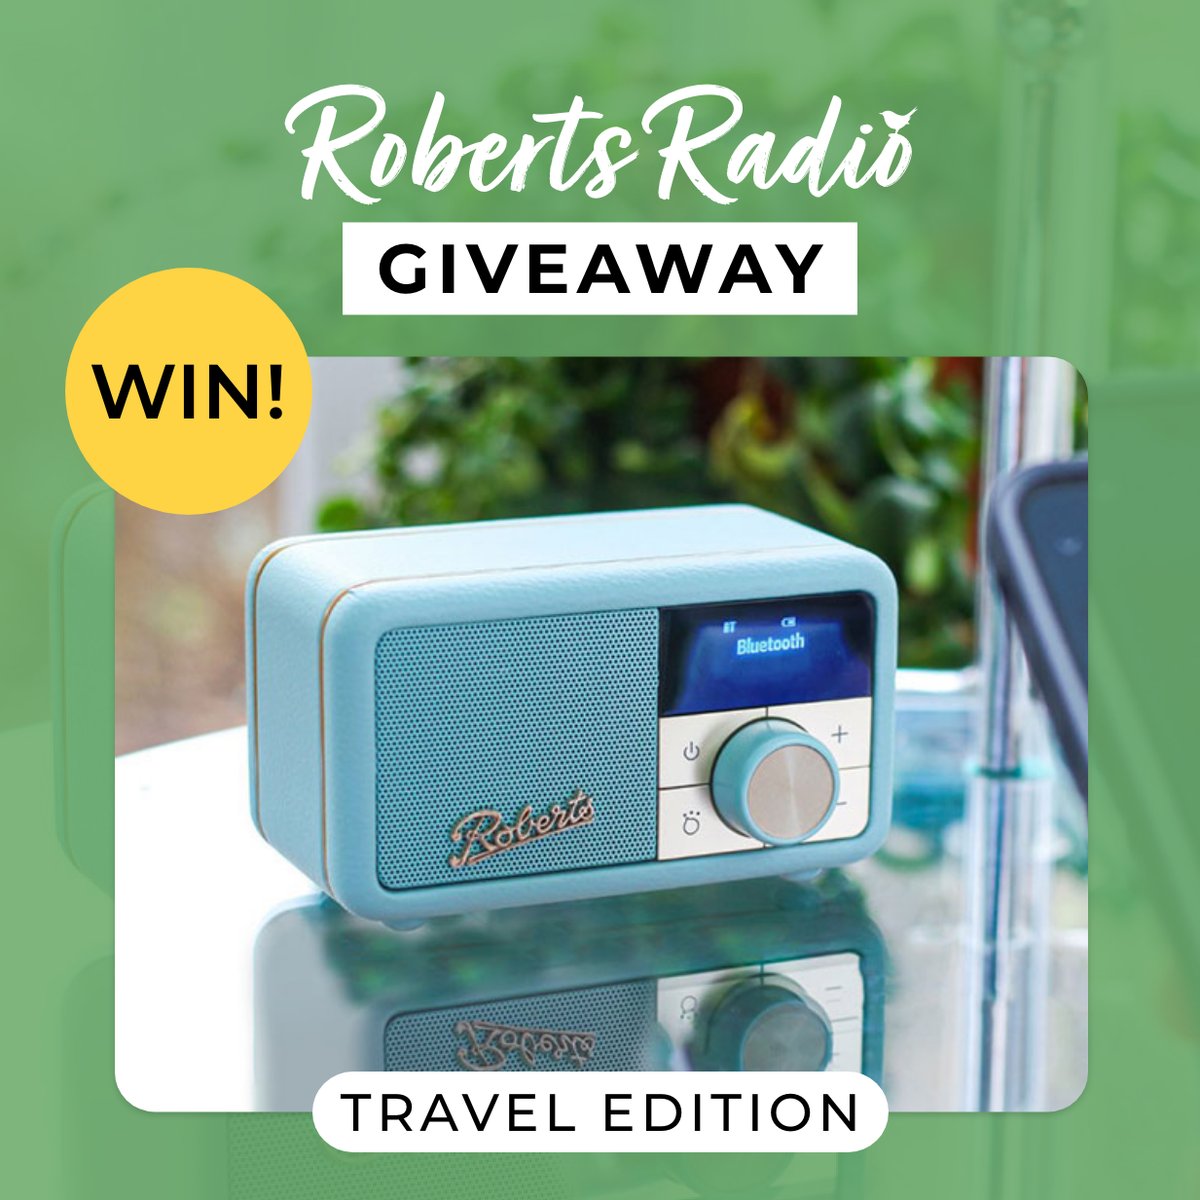 We're giving away a Roberts Radio (travel edition!), so you can enjoy your favourite tunes this Summer! 🎵 To #Win, like, share & comment with your favourite artist and album. *Competition closes 23:59 on 15/08/22. @WrenKitchens will contact the winner* #Giveaway #Competition